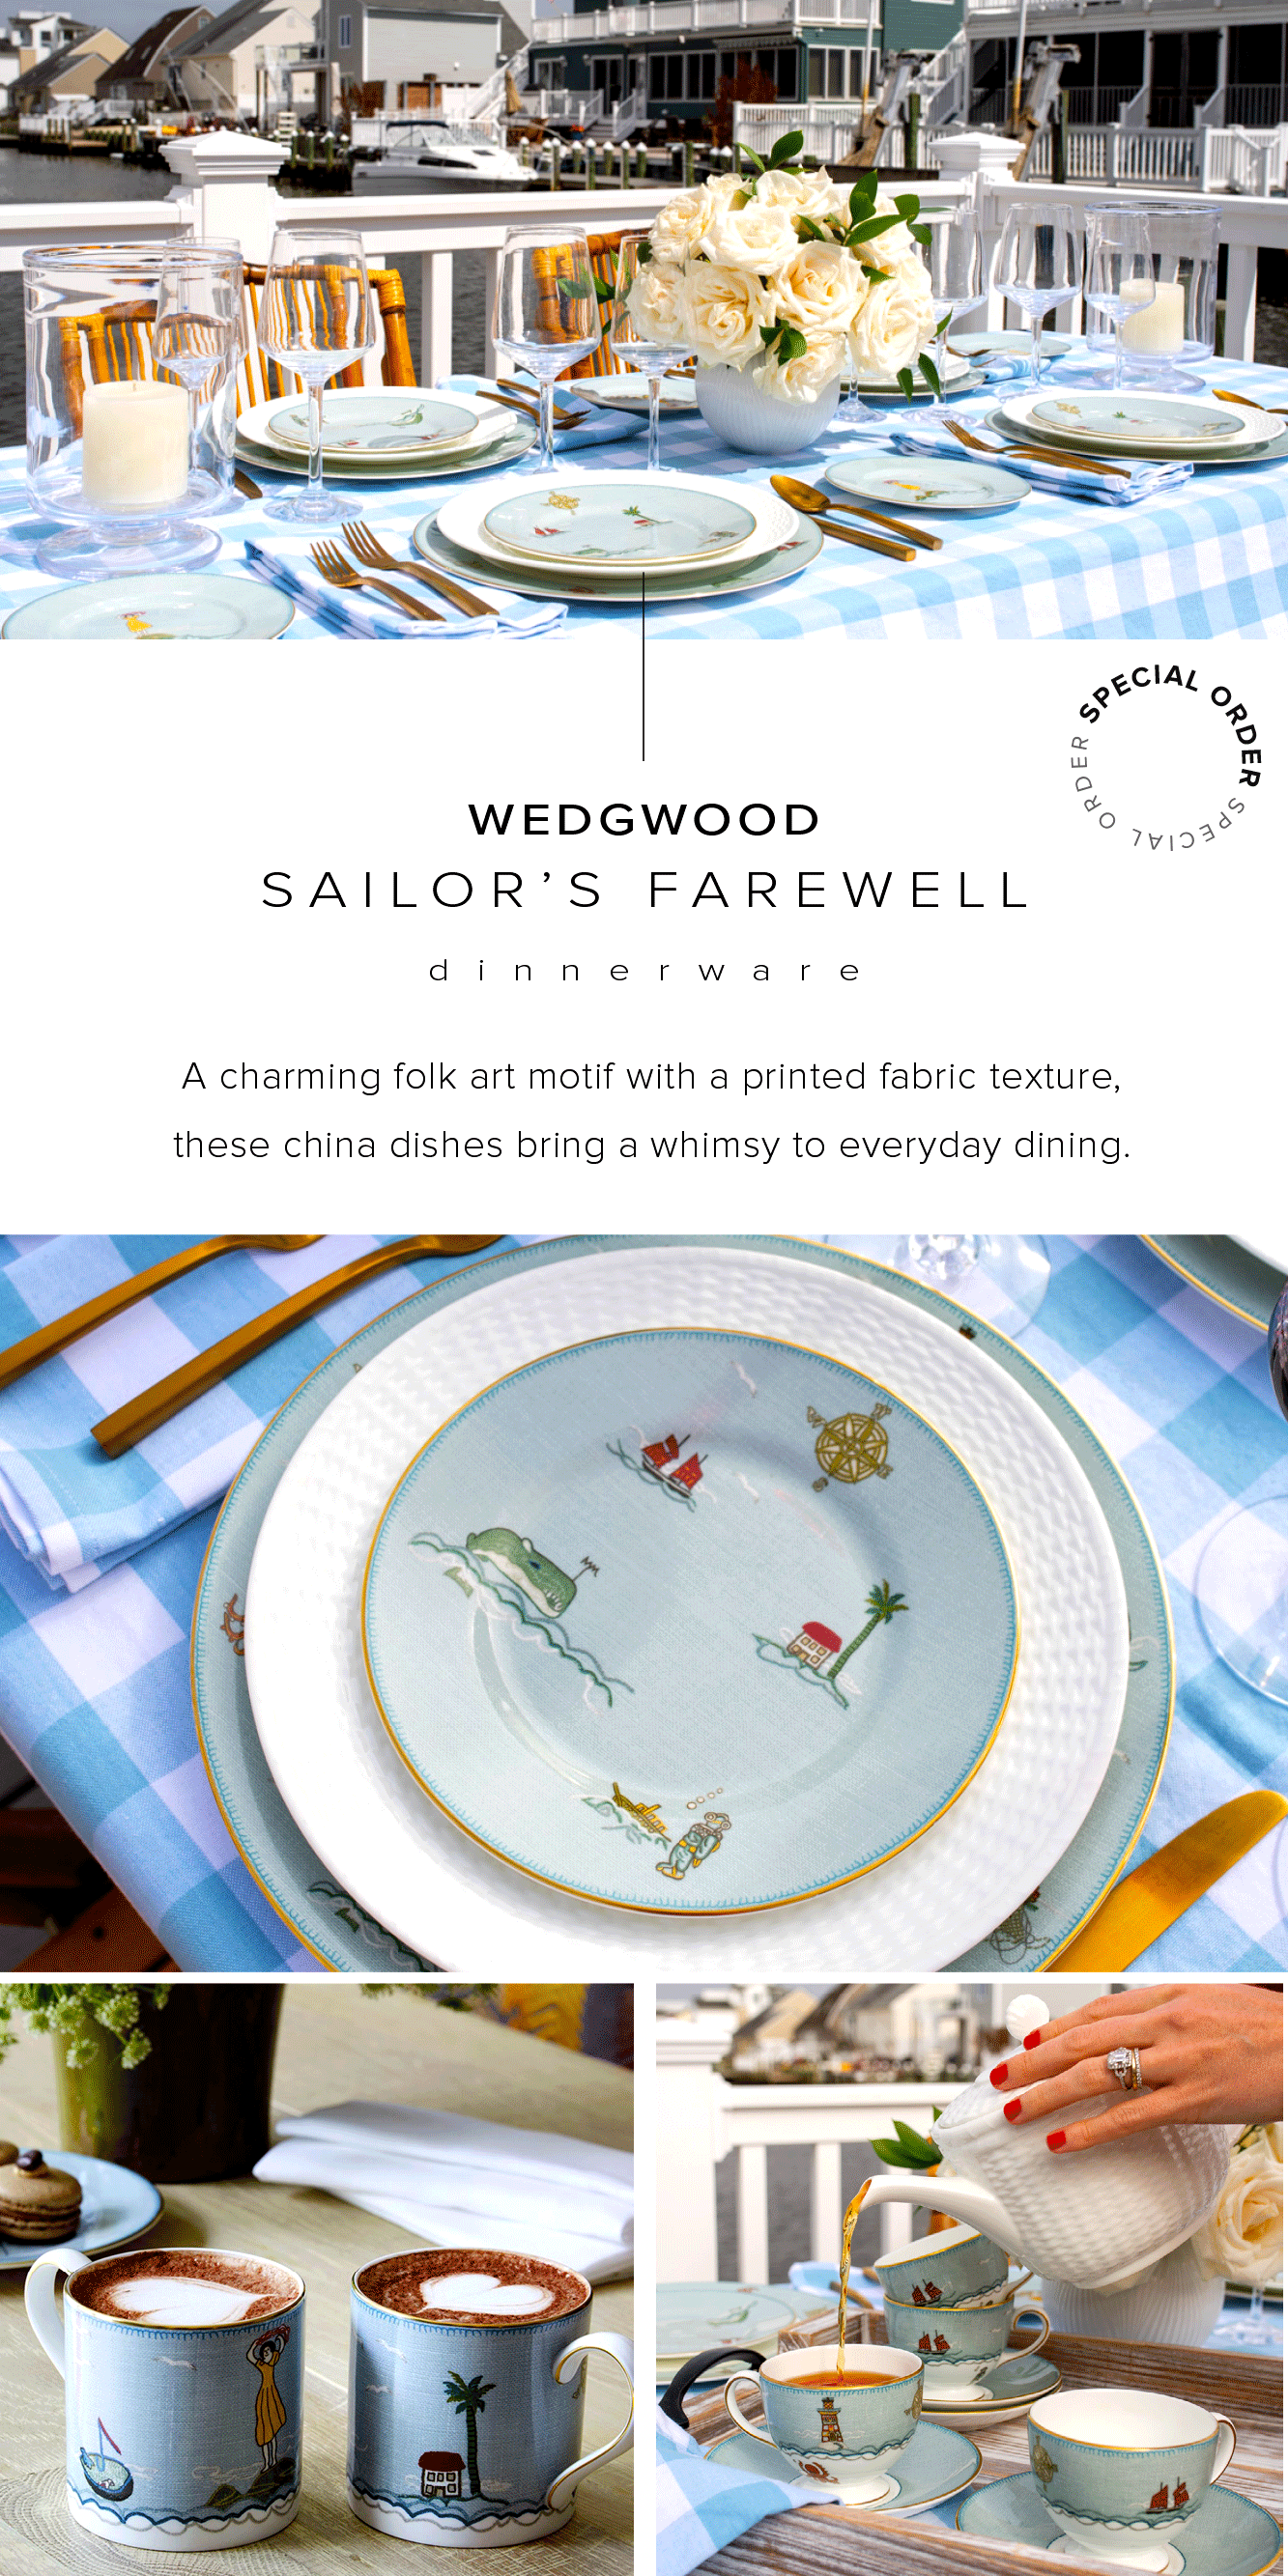  WEDGWOOD o s SAILORS FAREWELL dinnwerware A charming folk art motif with a printed fabric texture, these china dishes bring a whimsy to everyday dining. 